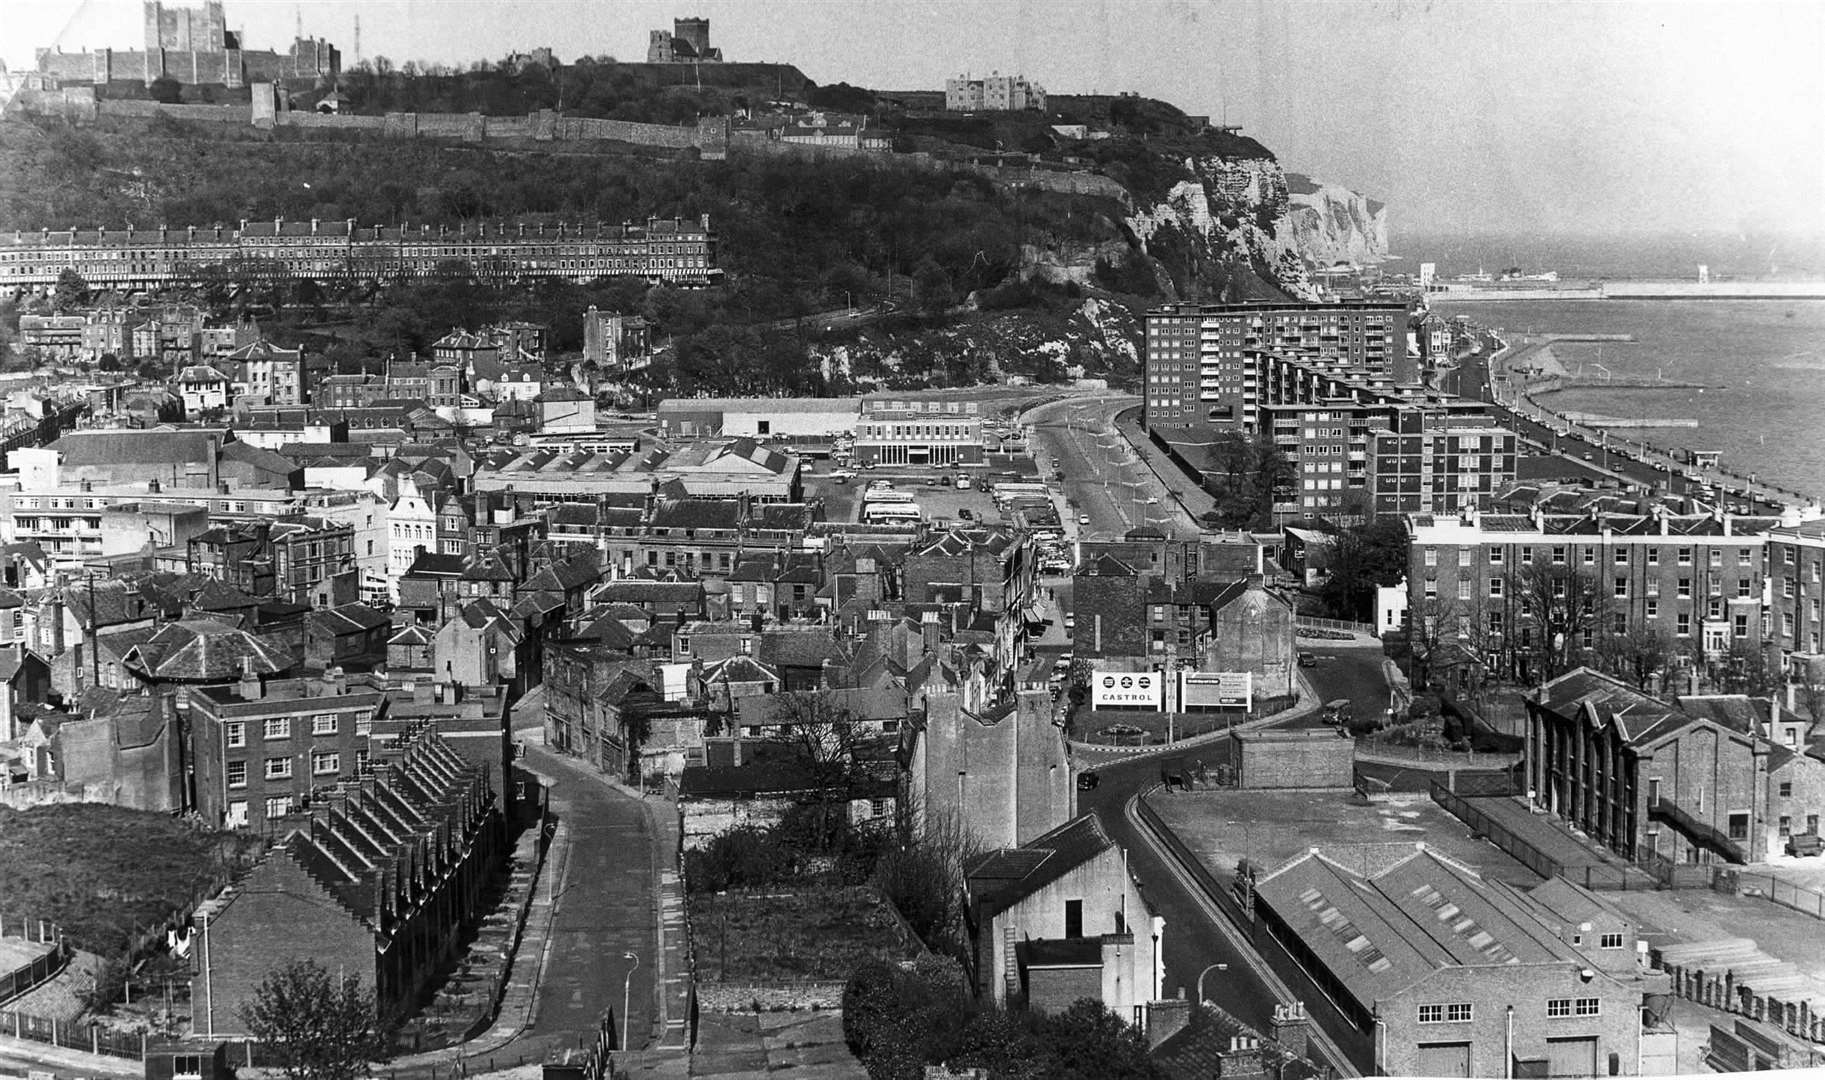 Looking across to Dover Castle in 1967. Later, the view would be obstructed by the now-demolished Burlington House tower block